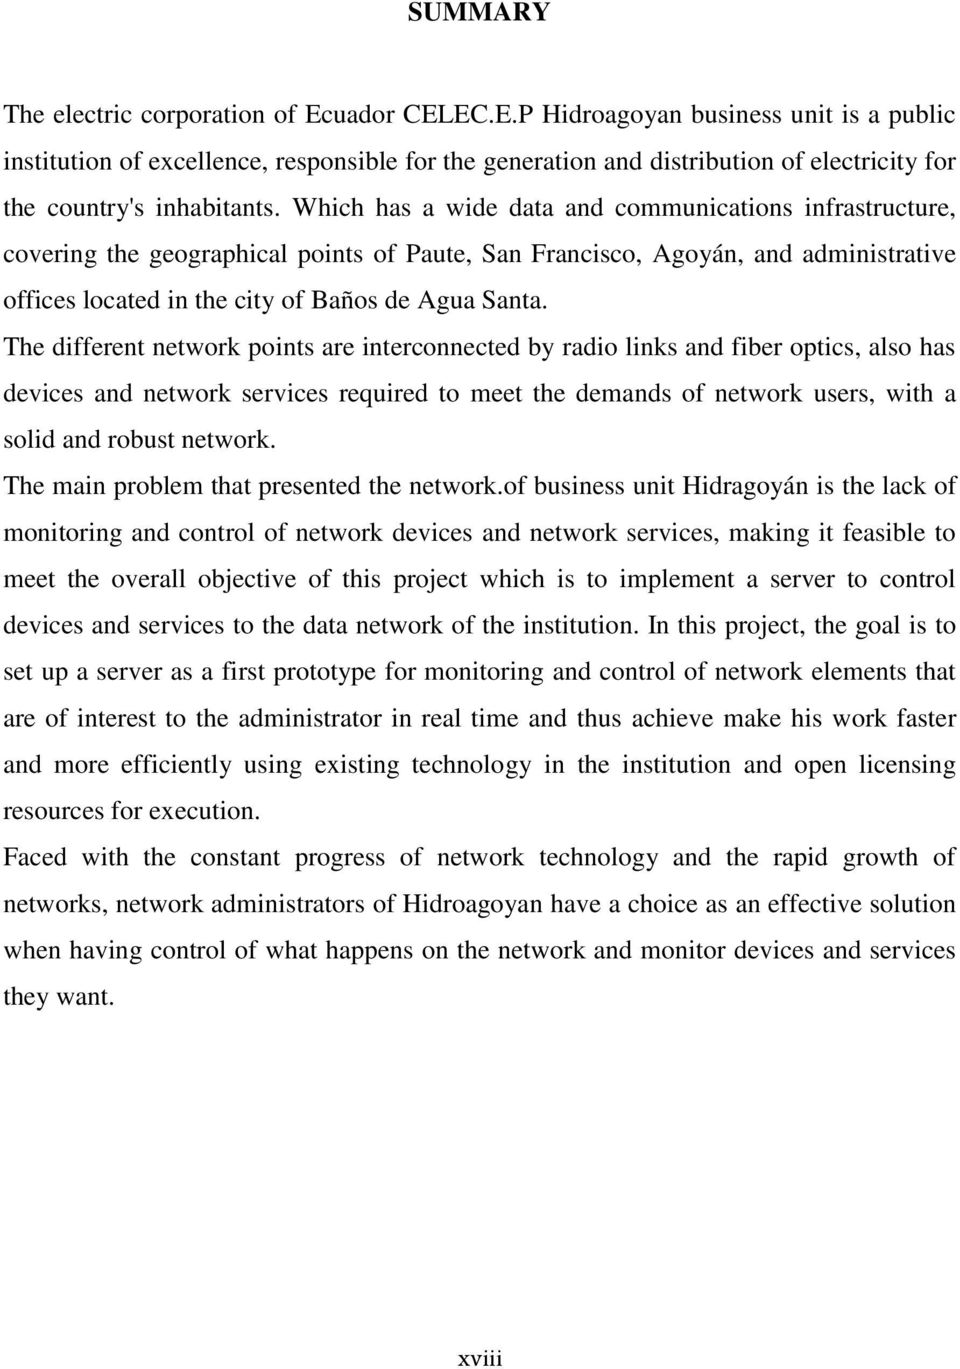 The different network points are interconnected by radio links and fiber optics, also has devices and network services required to meet the demands of network users, with a solid and robust network.